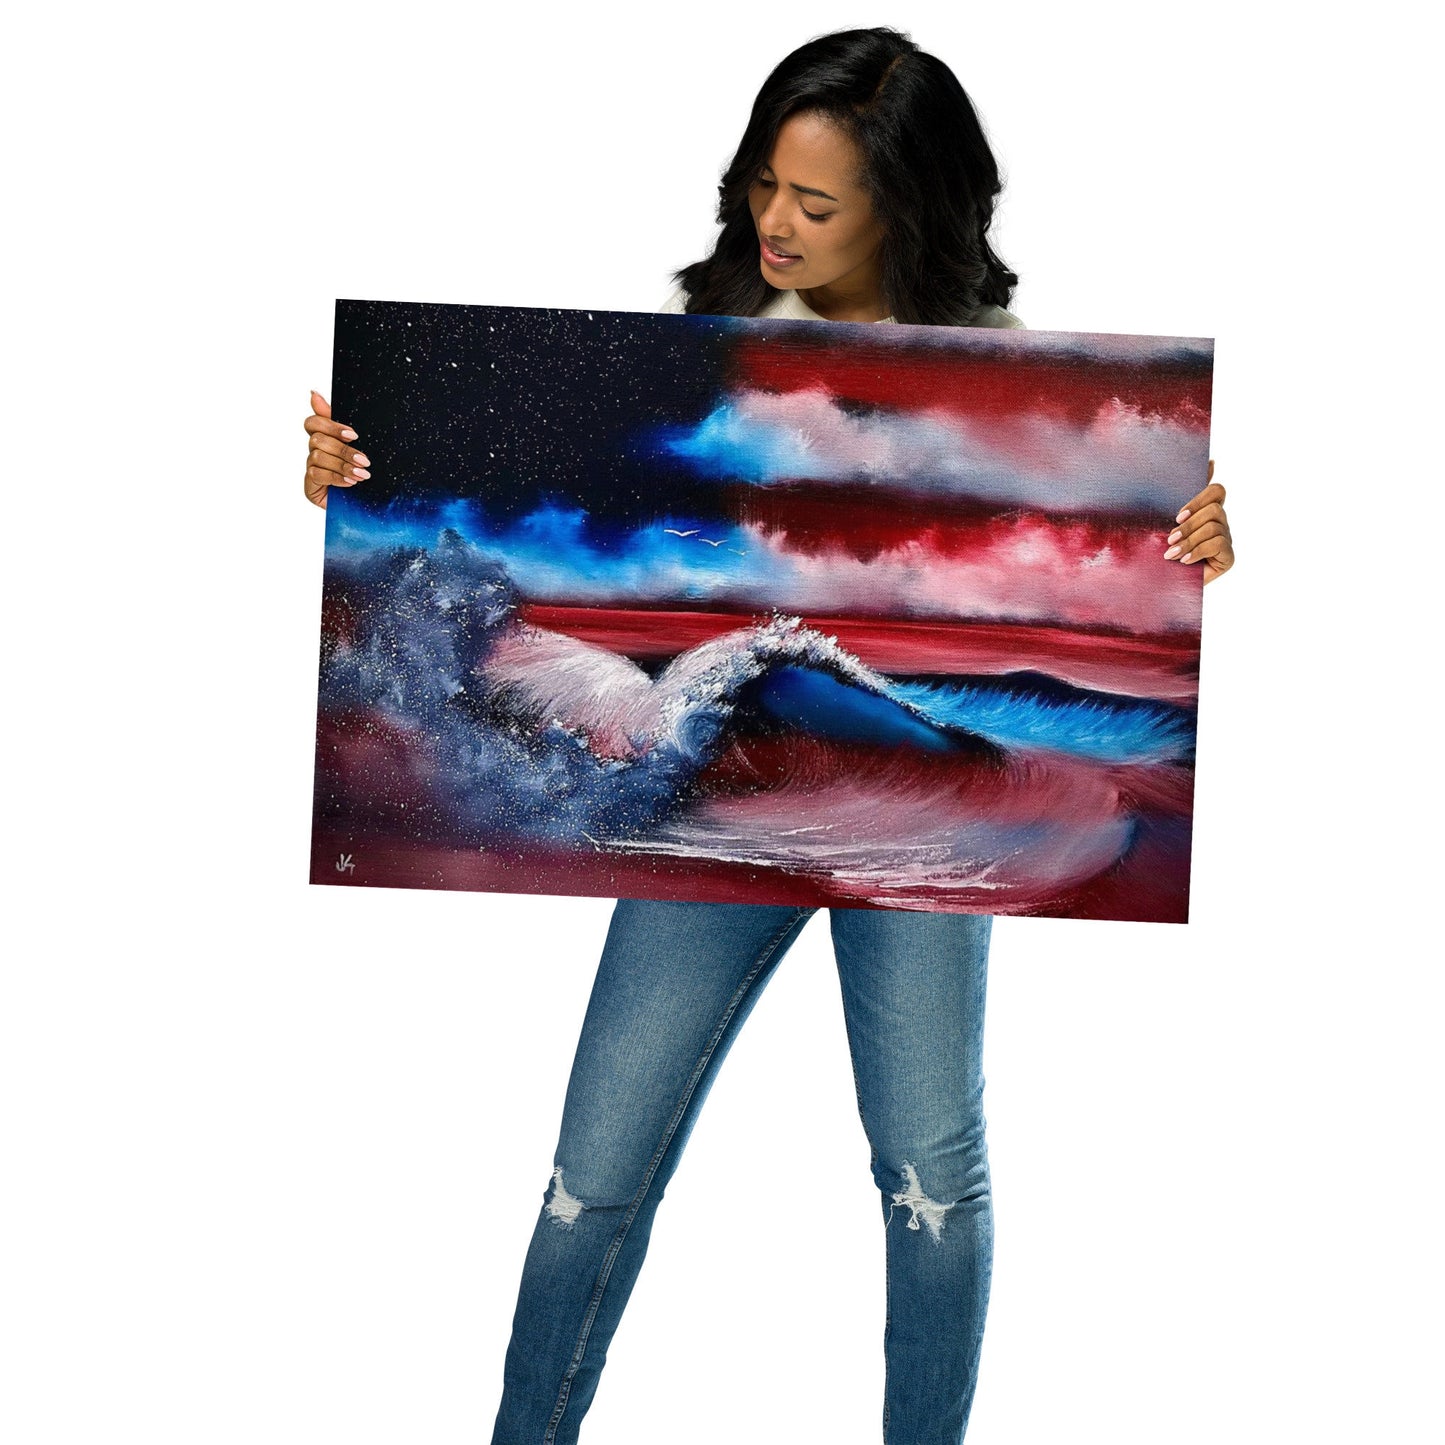 Poster Print - American Flag Seascape Version 2 by PaintWithJosh